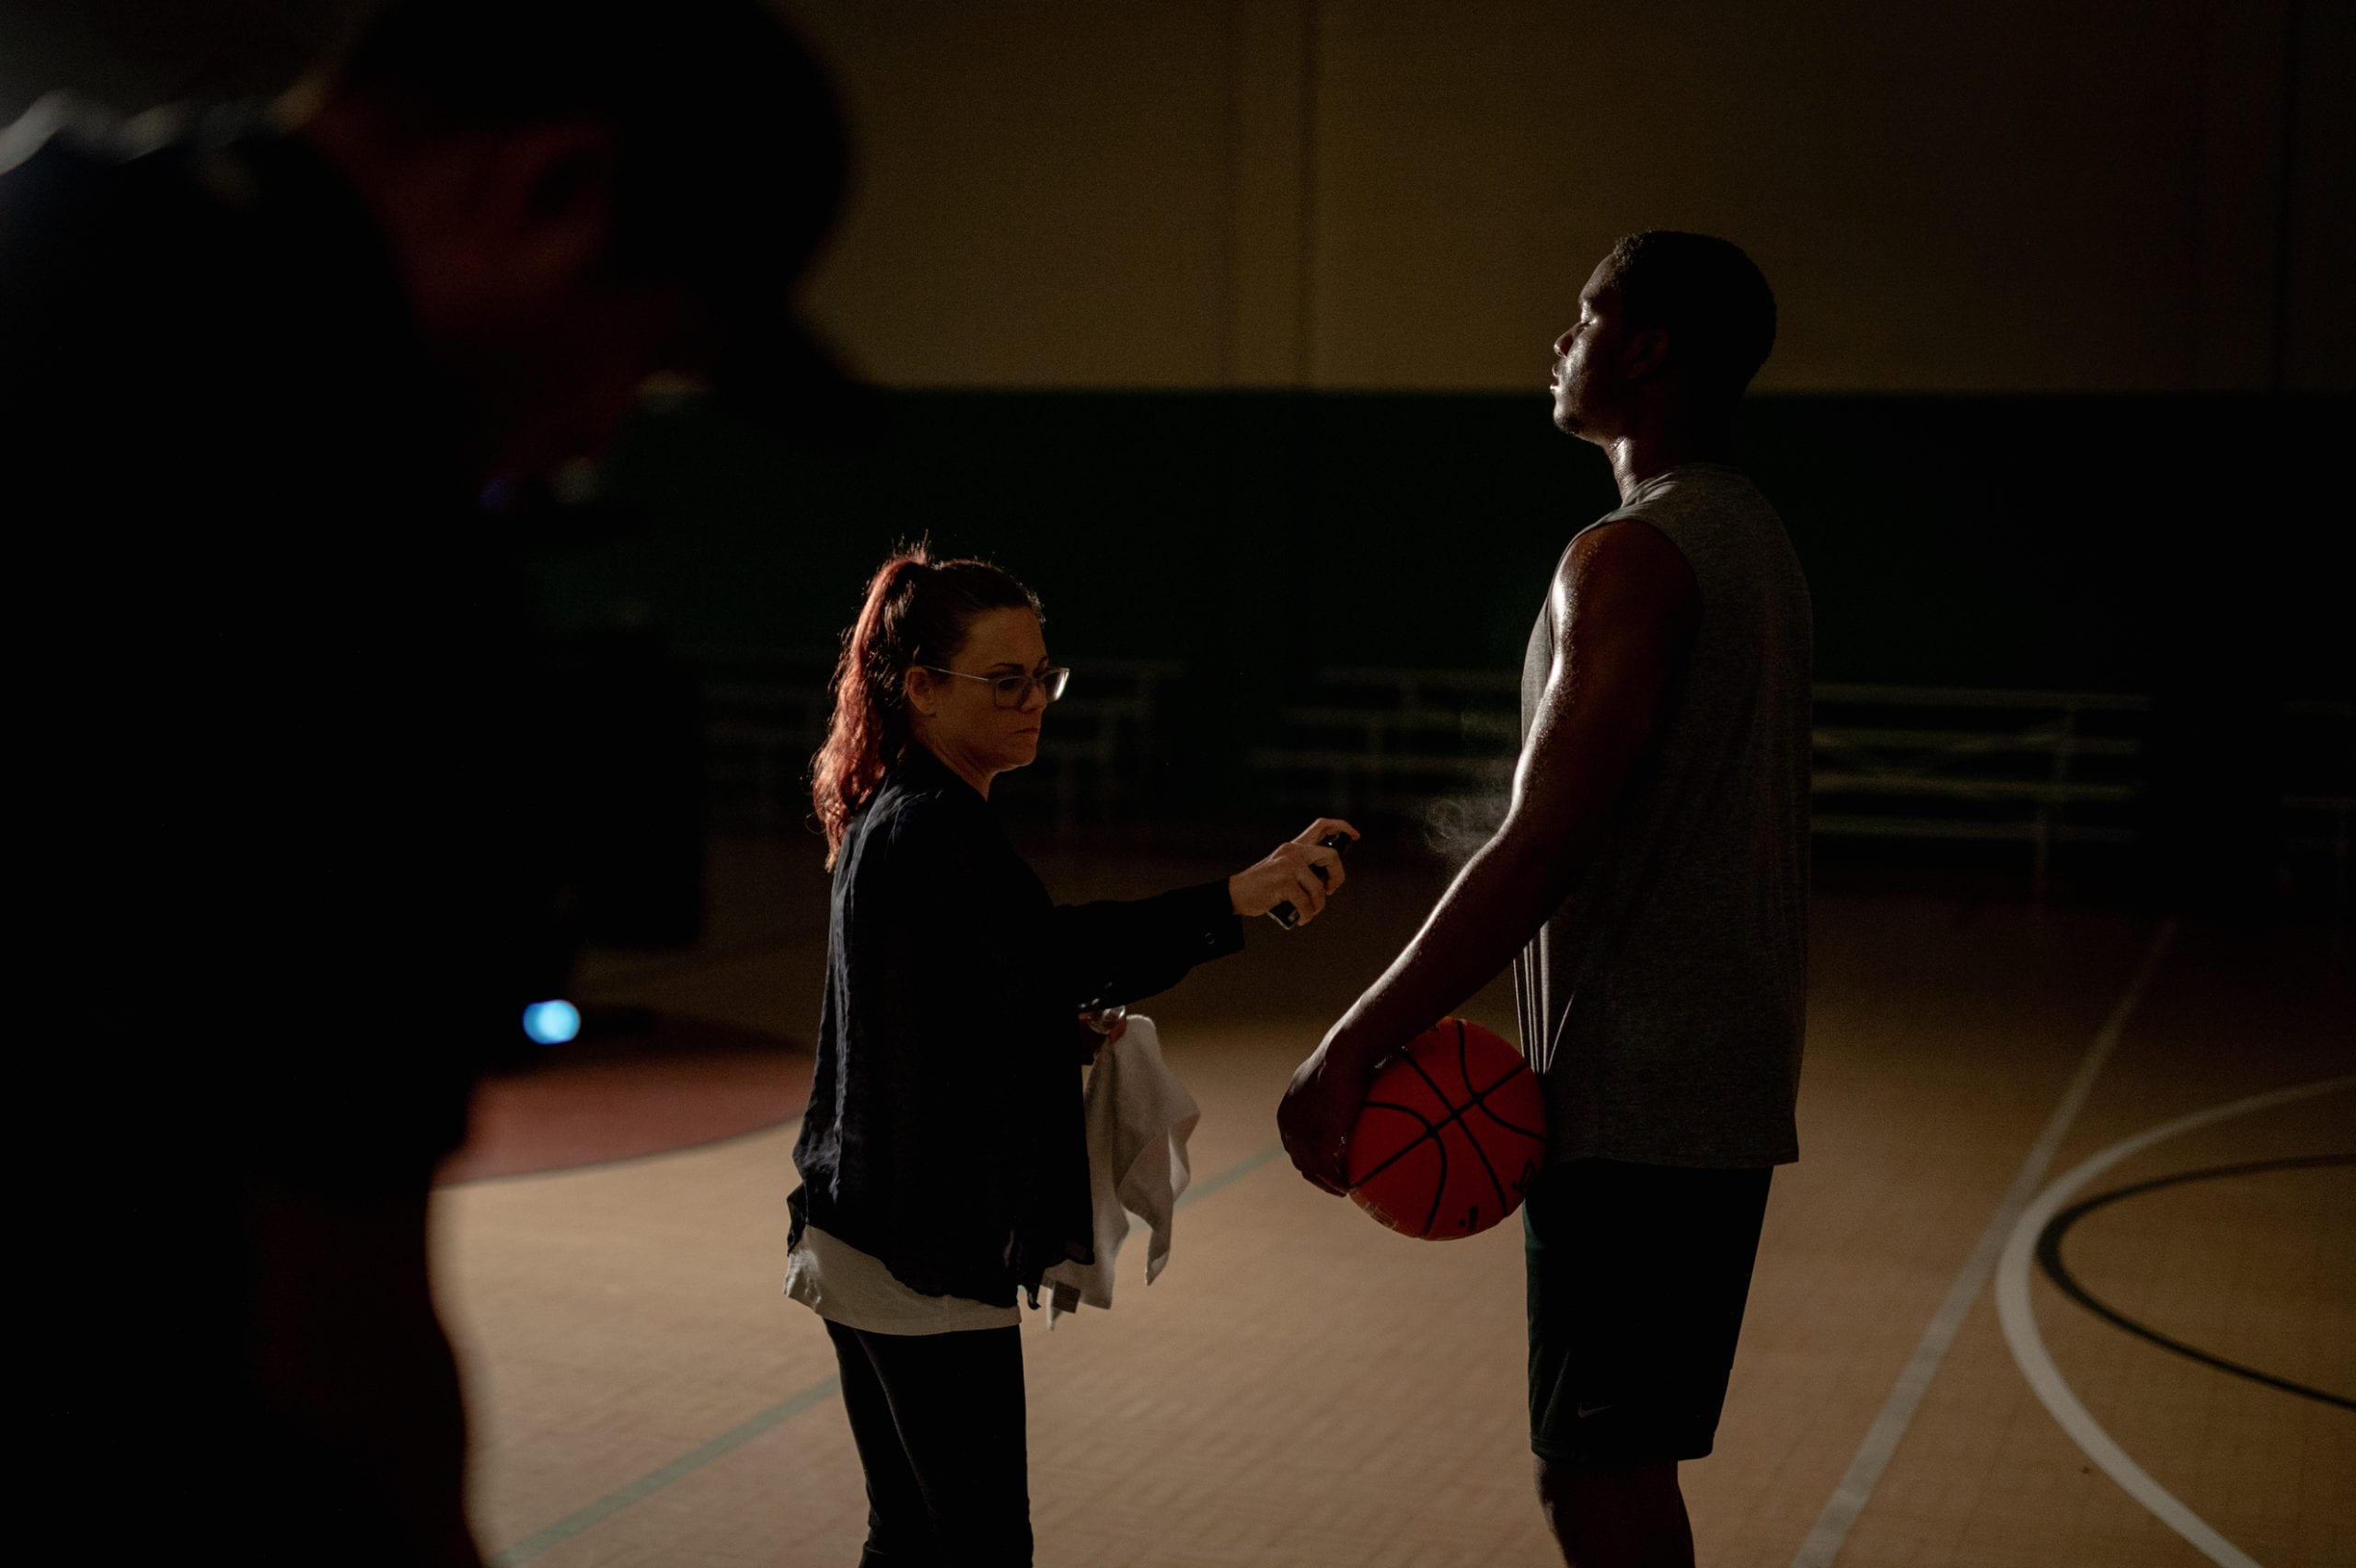 Nike scene being filmed on a basketball court in a gym with an African American man wearing a gray t shirt holding a ball being tended to by a makeup artist